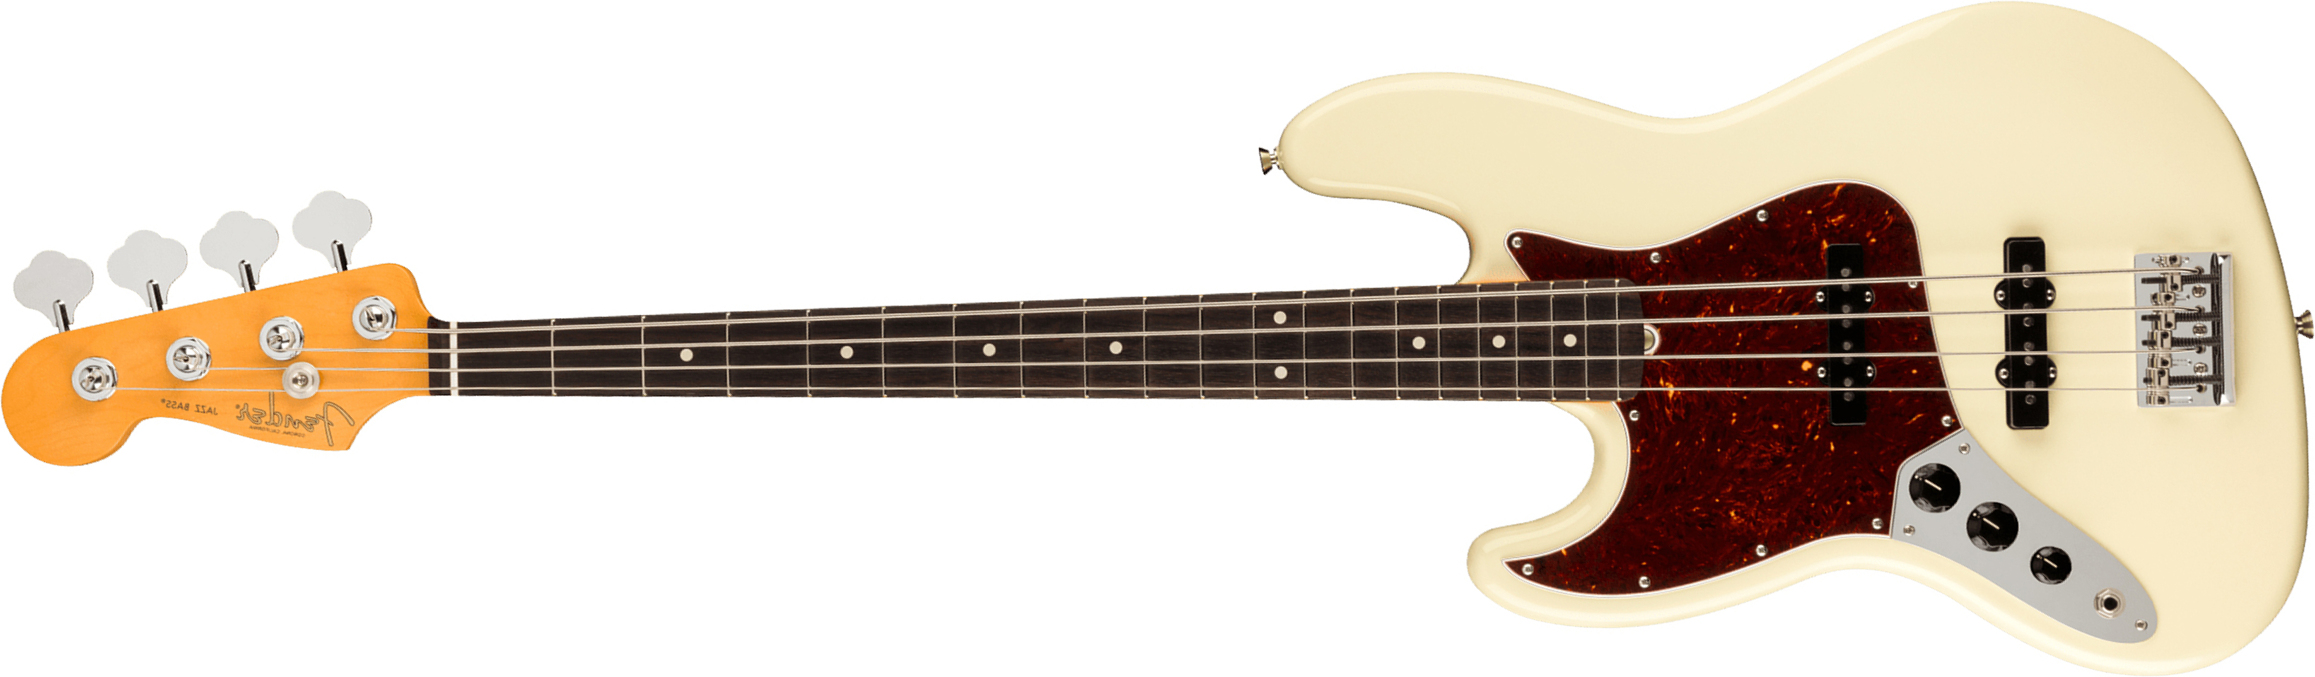 Fender Jazz Bass American Professional Ii Lh Gaucher Usa Rw - Olympic White - Basse Électrique Solid Body - Main picture